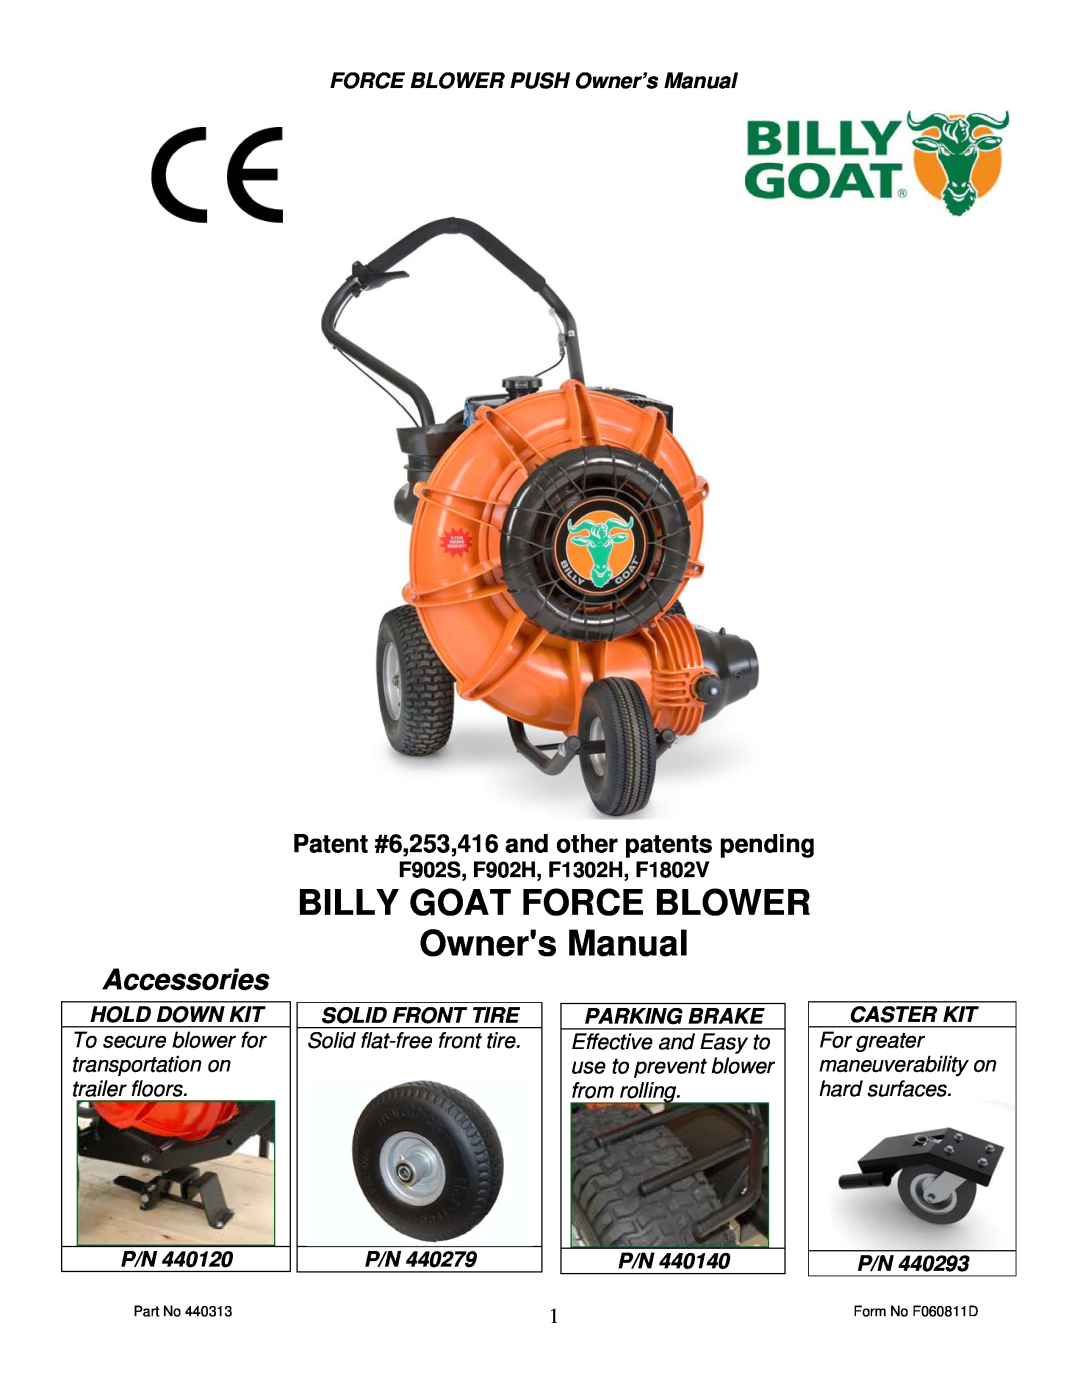 Billy Goat owner manual Patent #6,253,416 and other patents pending, F902S, F902H, F1302H, F1802V, Hold Down Kit 